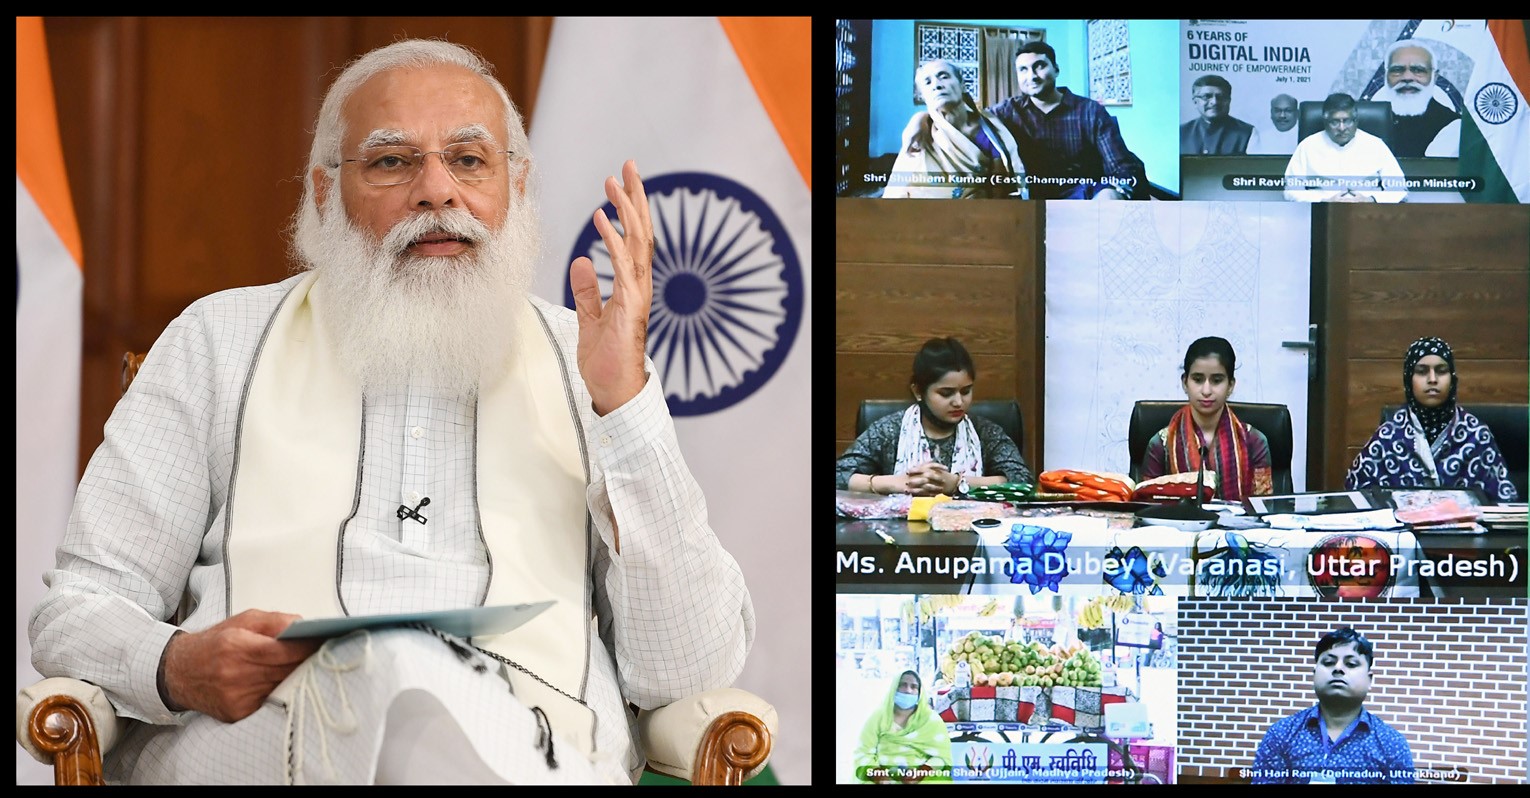 Prime Minister, Narendra Modi interacting with the beneficiaries of ‘Digital India’, on the occasion of the 6th anniversary of Digital India Abhiyan, through video conferencing, in New Delhi on July 01, 2021.